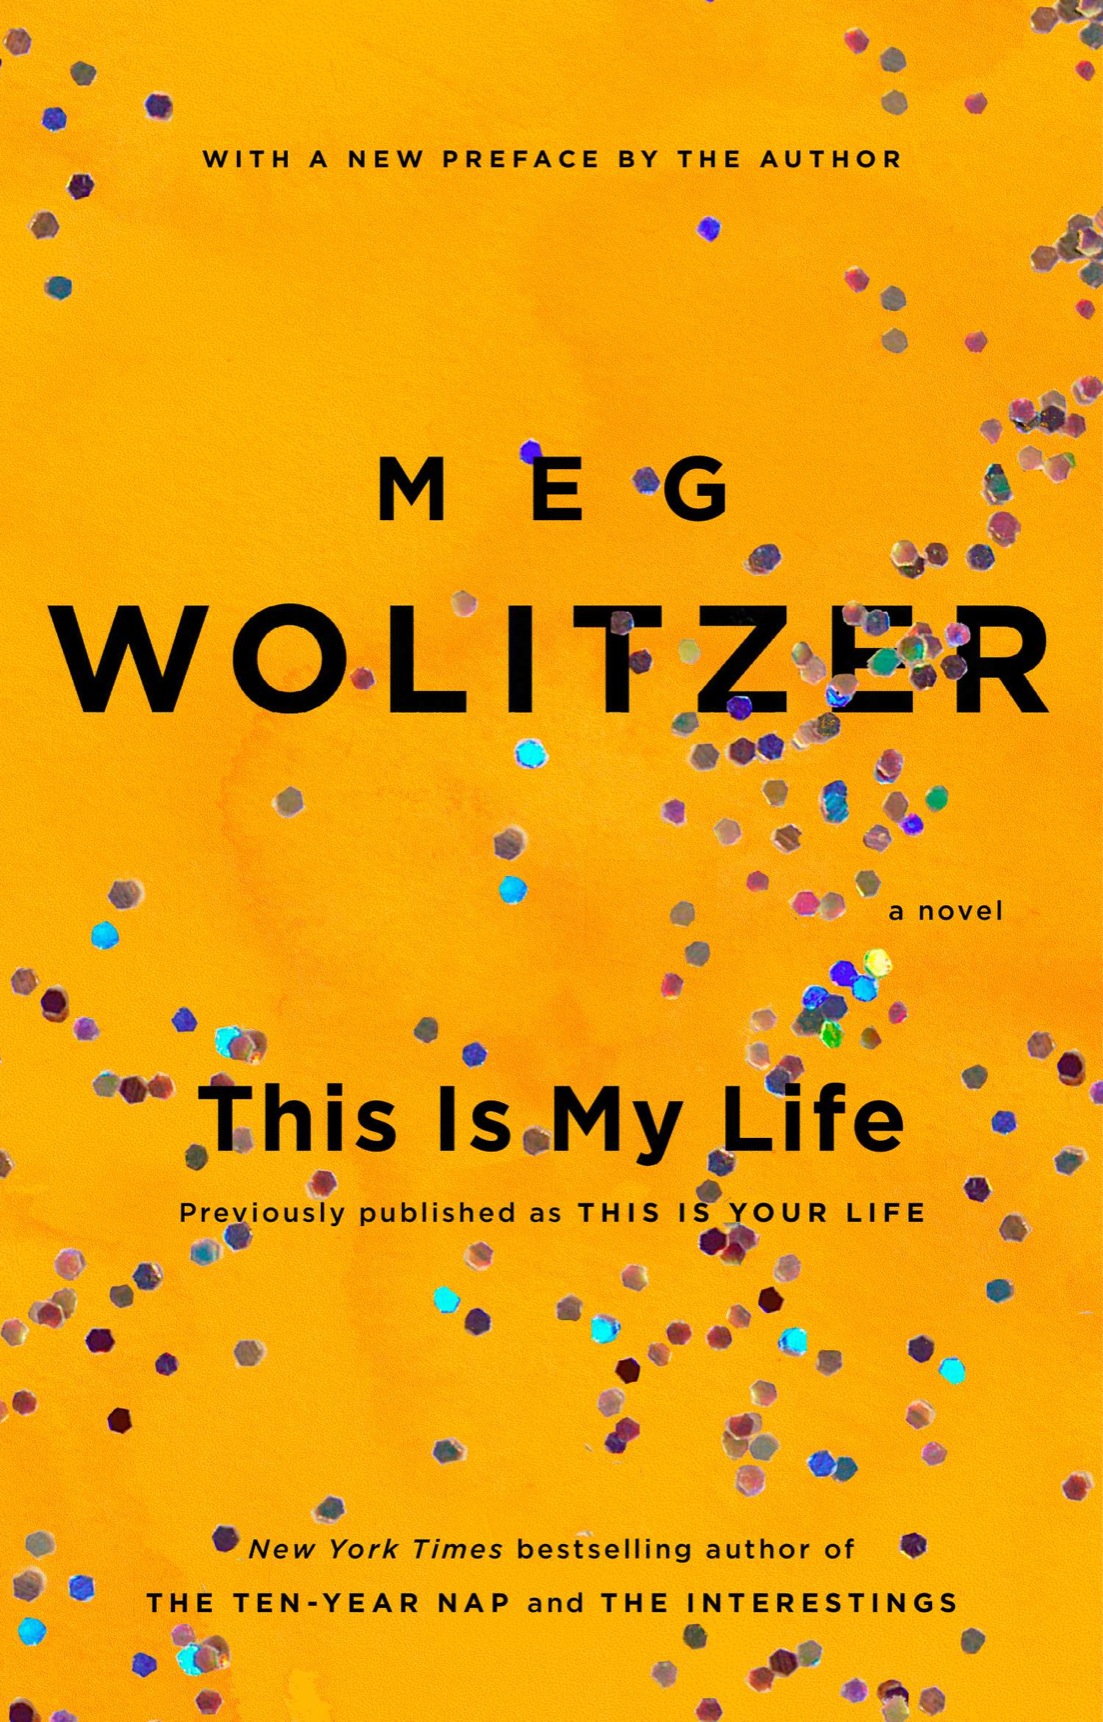 This Is My Life (2014) by Meg Wolitzer